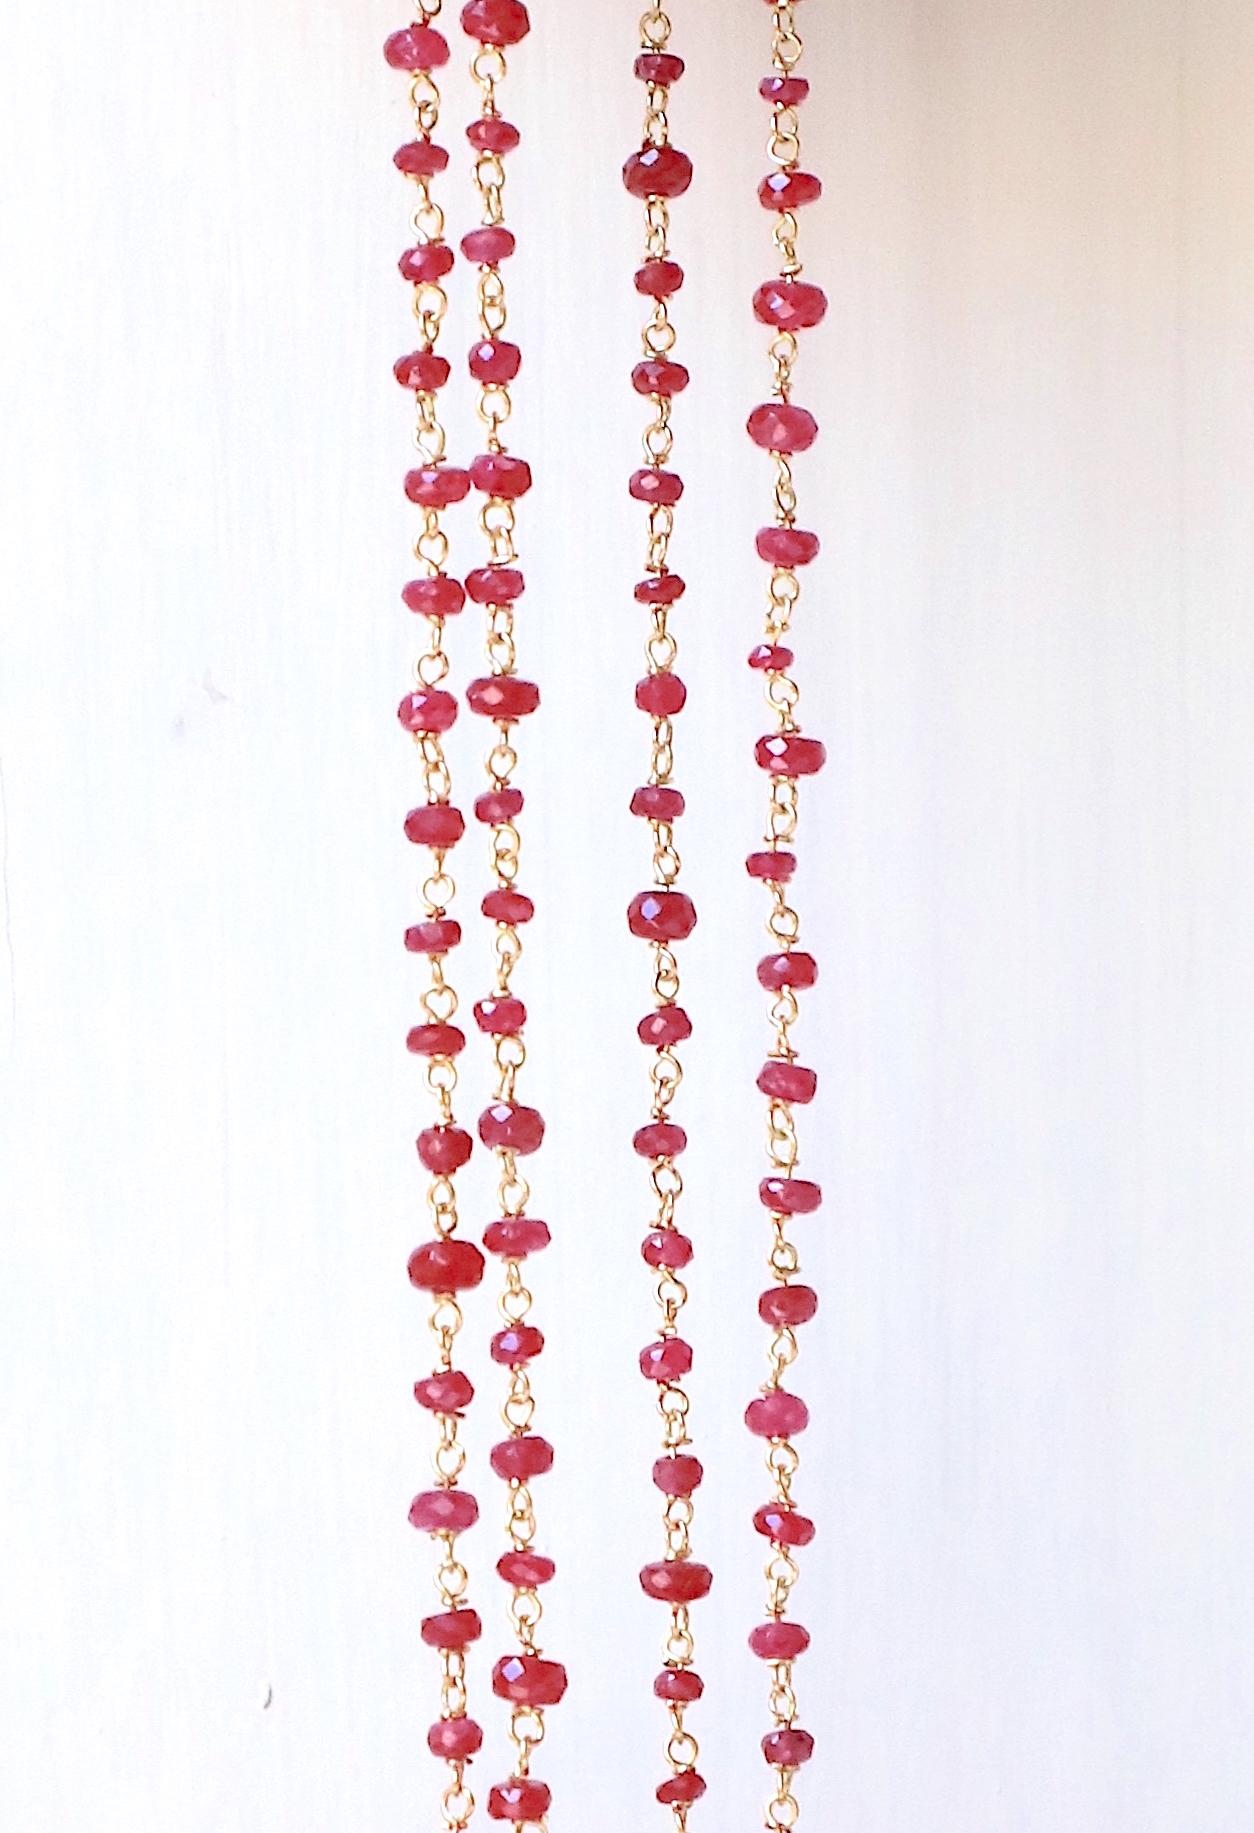 5 bead necklace